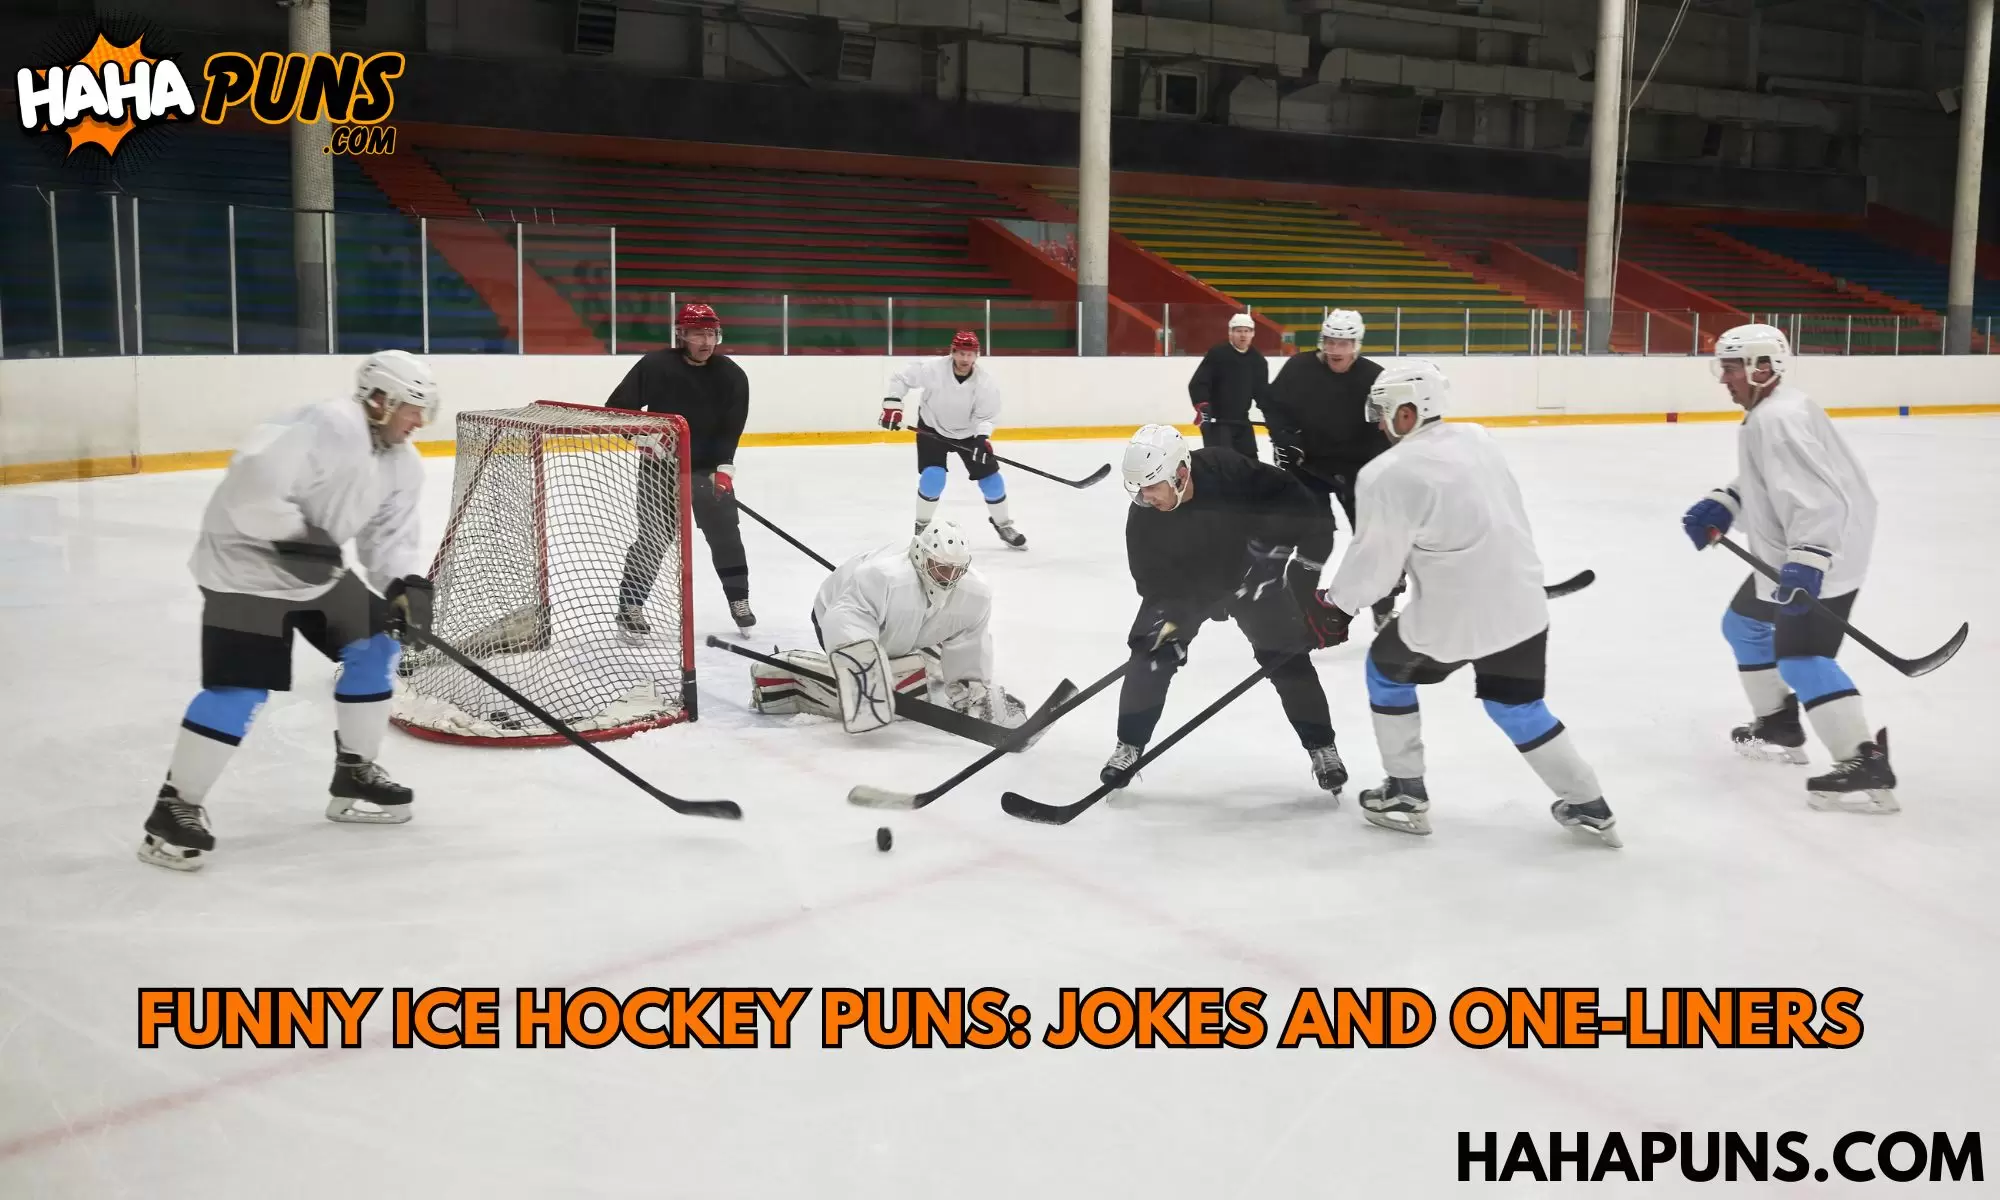 Funny Ice Hockey Puns: Jokes And One-Liners